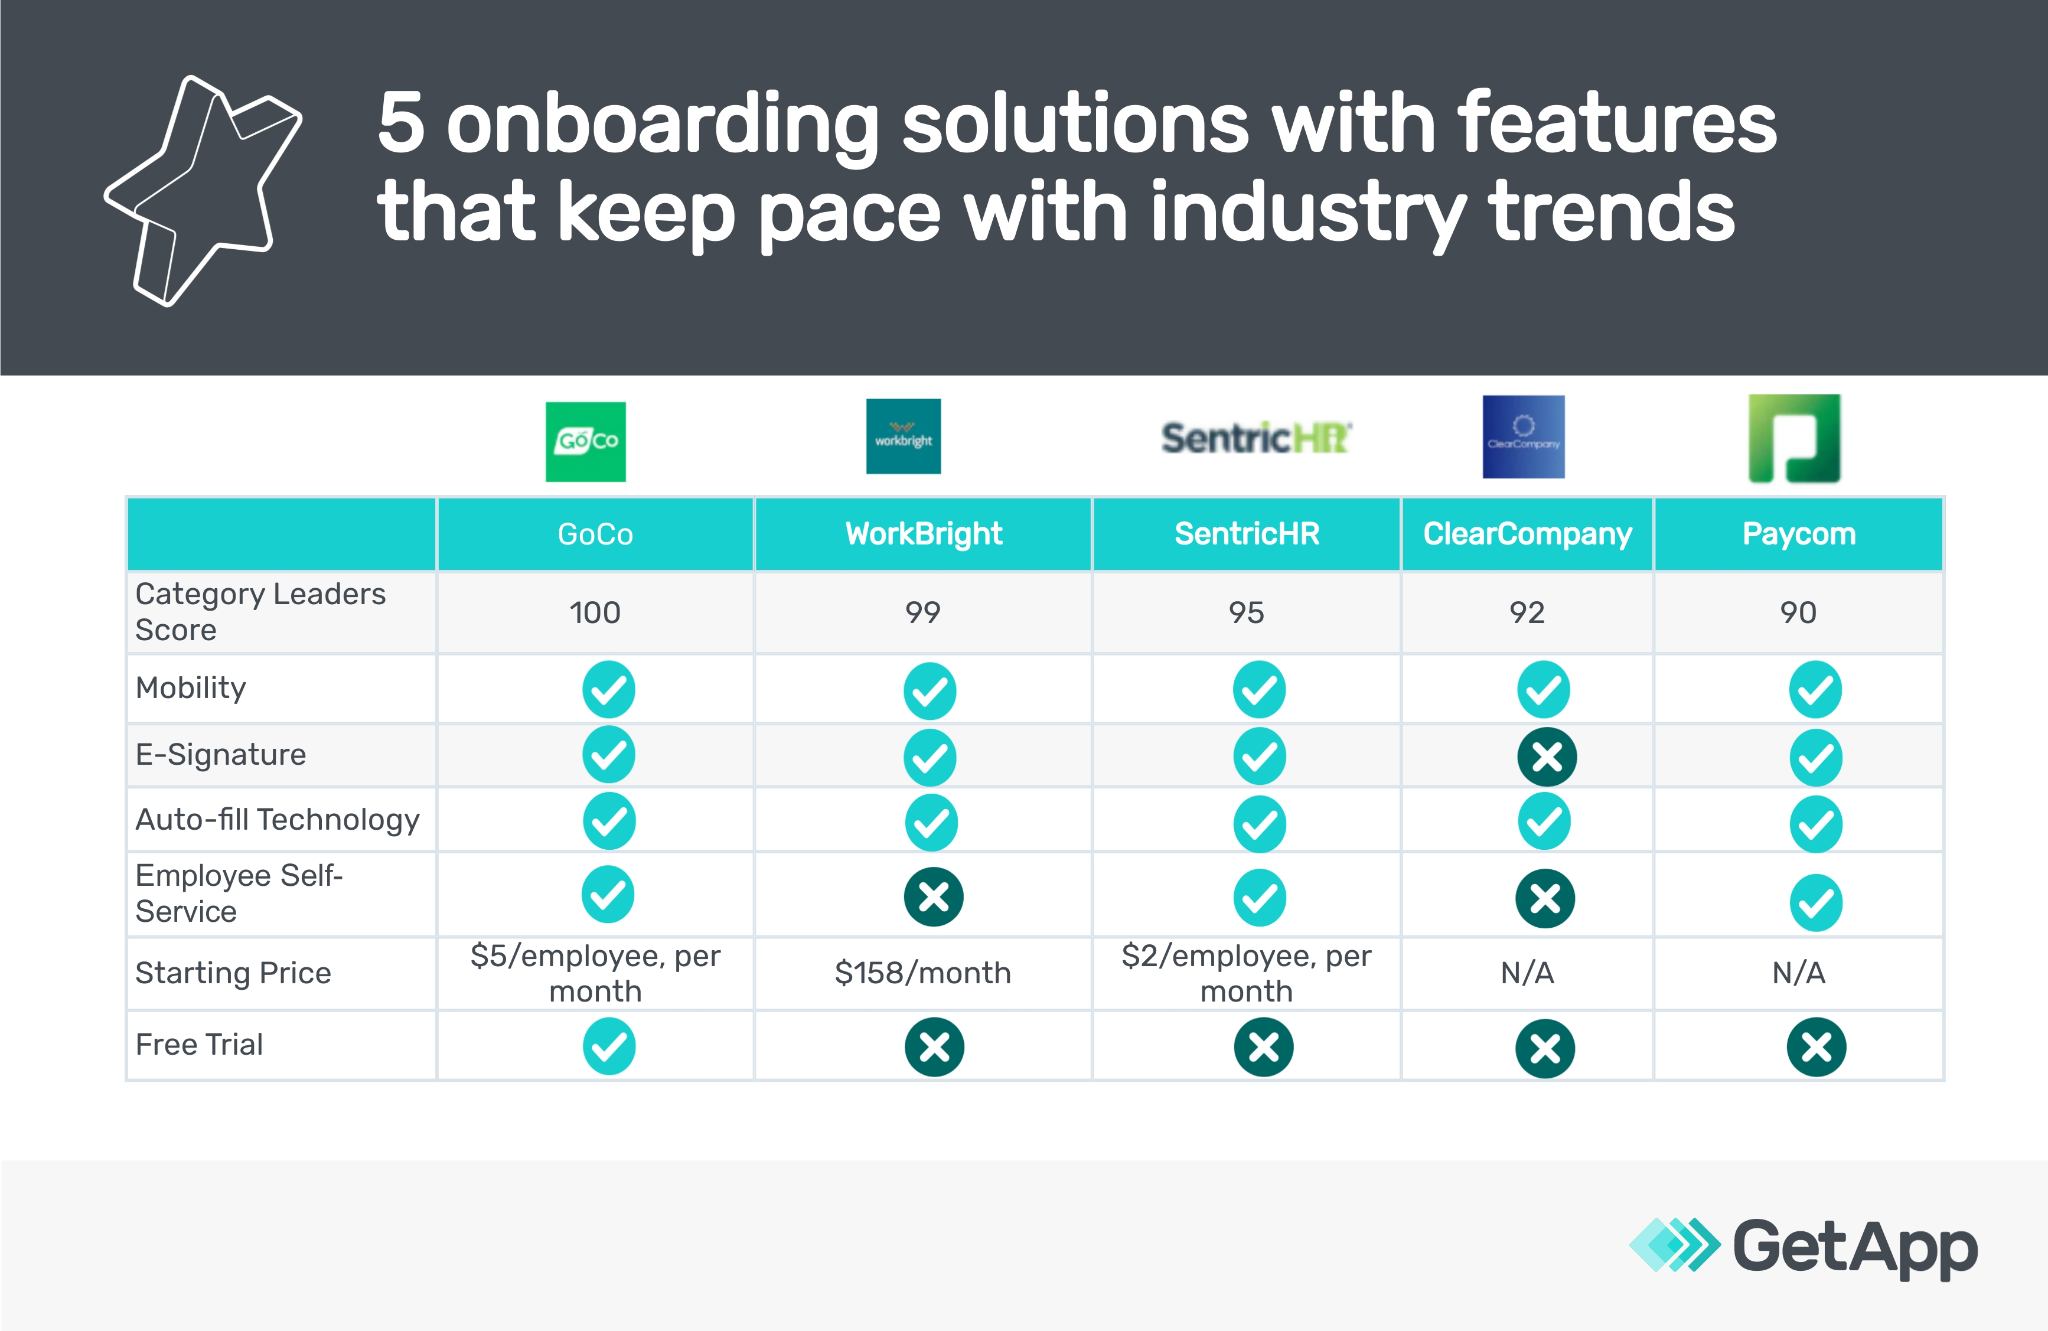 5-onboarding-solutions-with-features-that-keep-pace-with-industry-trends